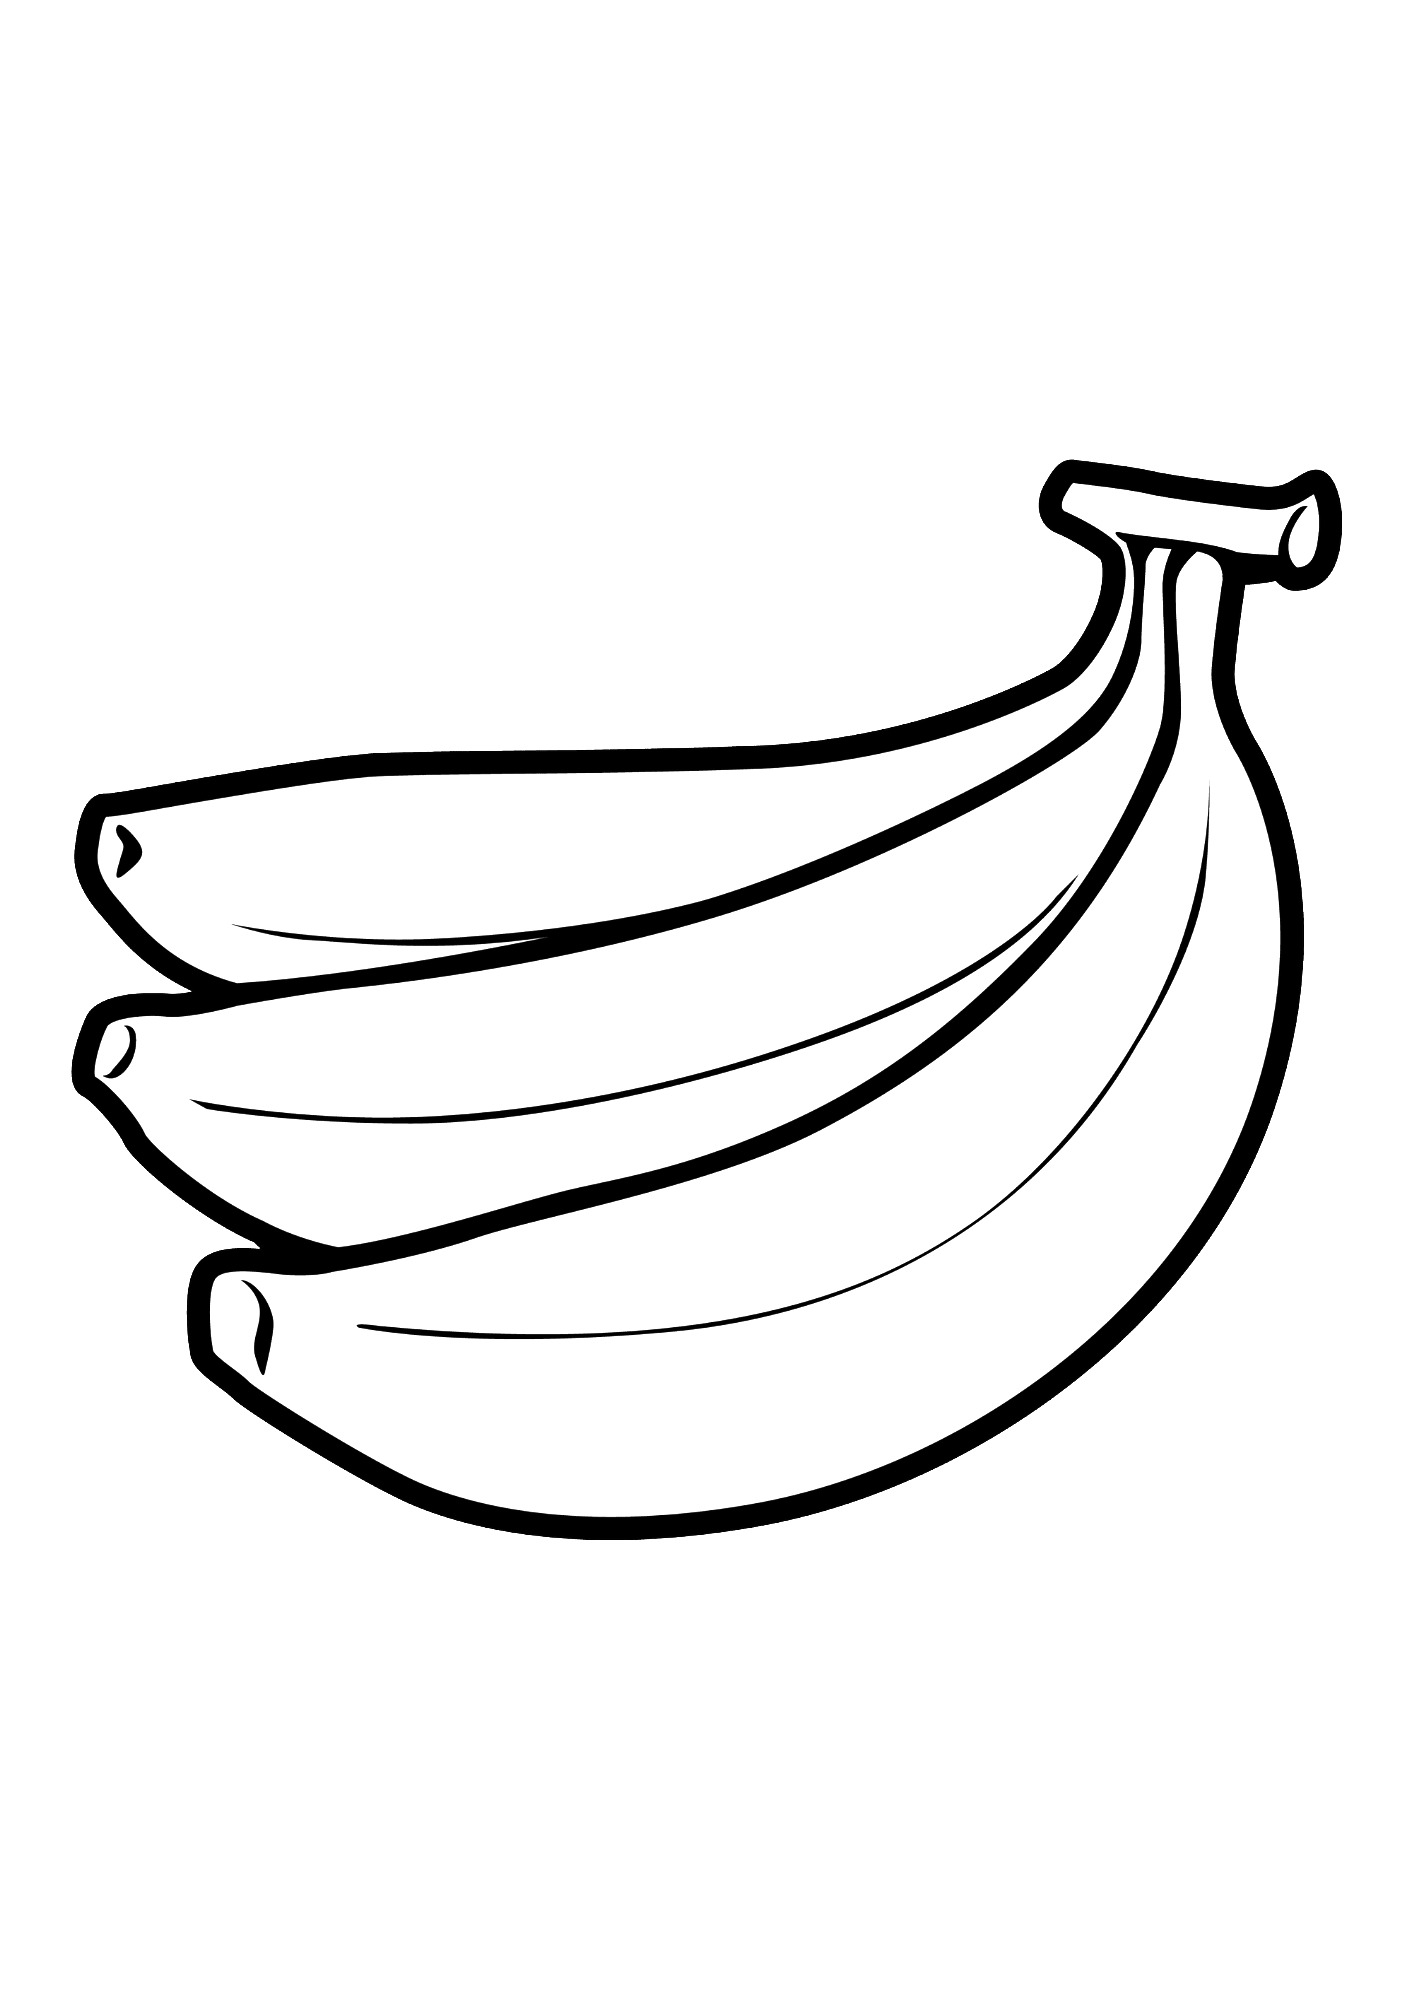 Simple Bananas Art Coloring Pages